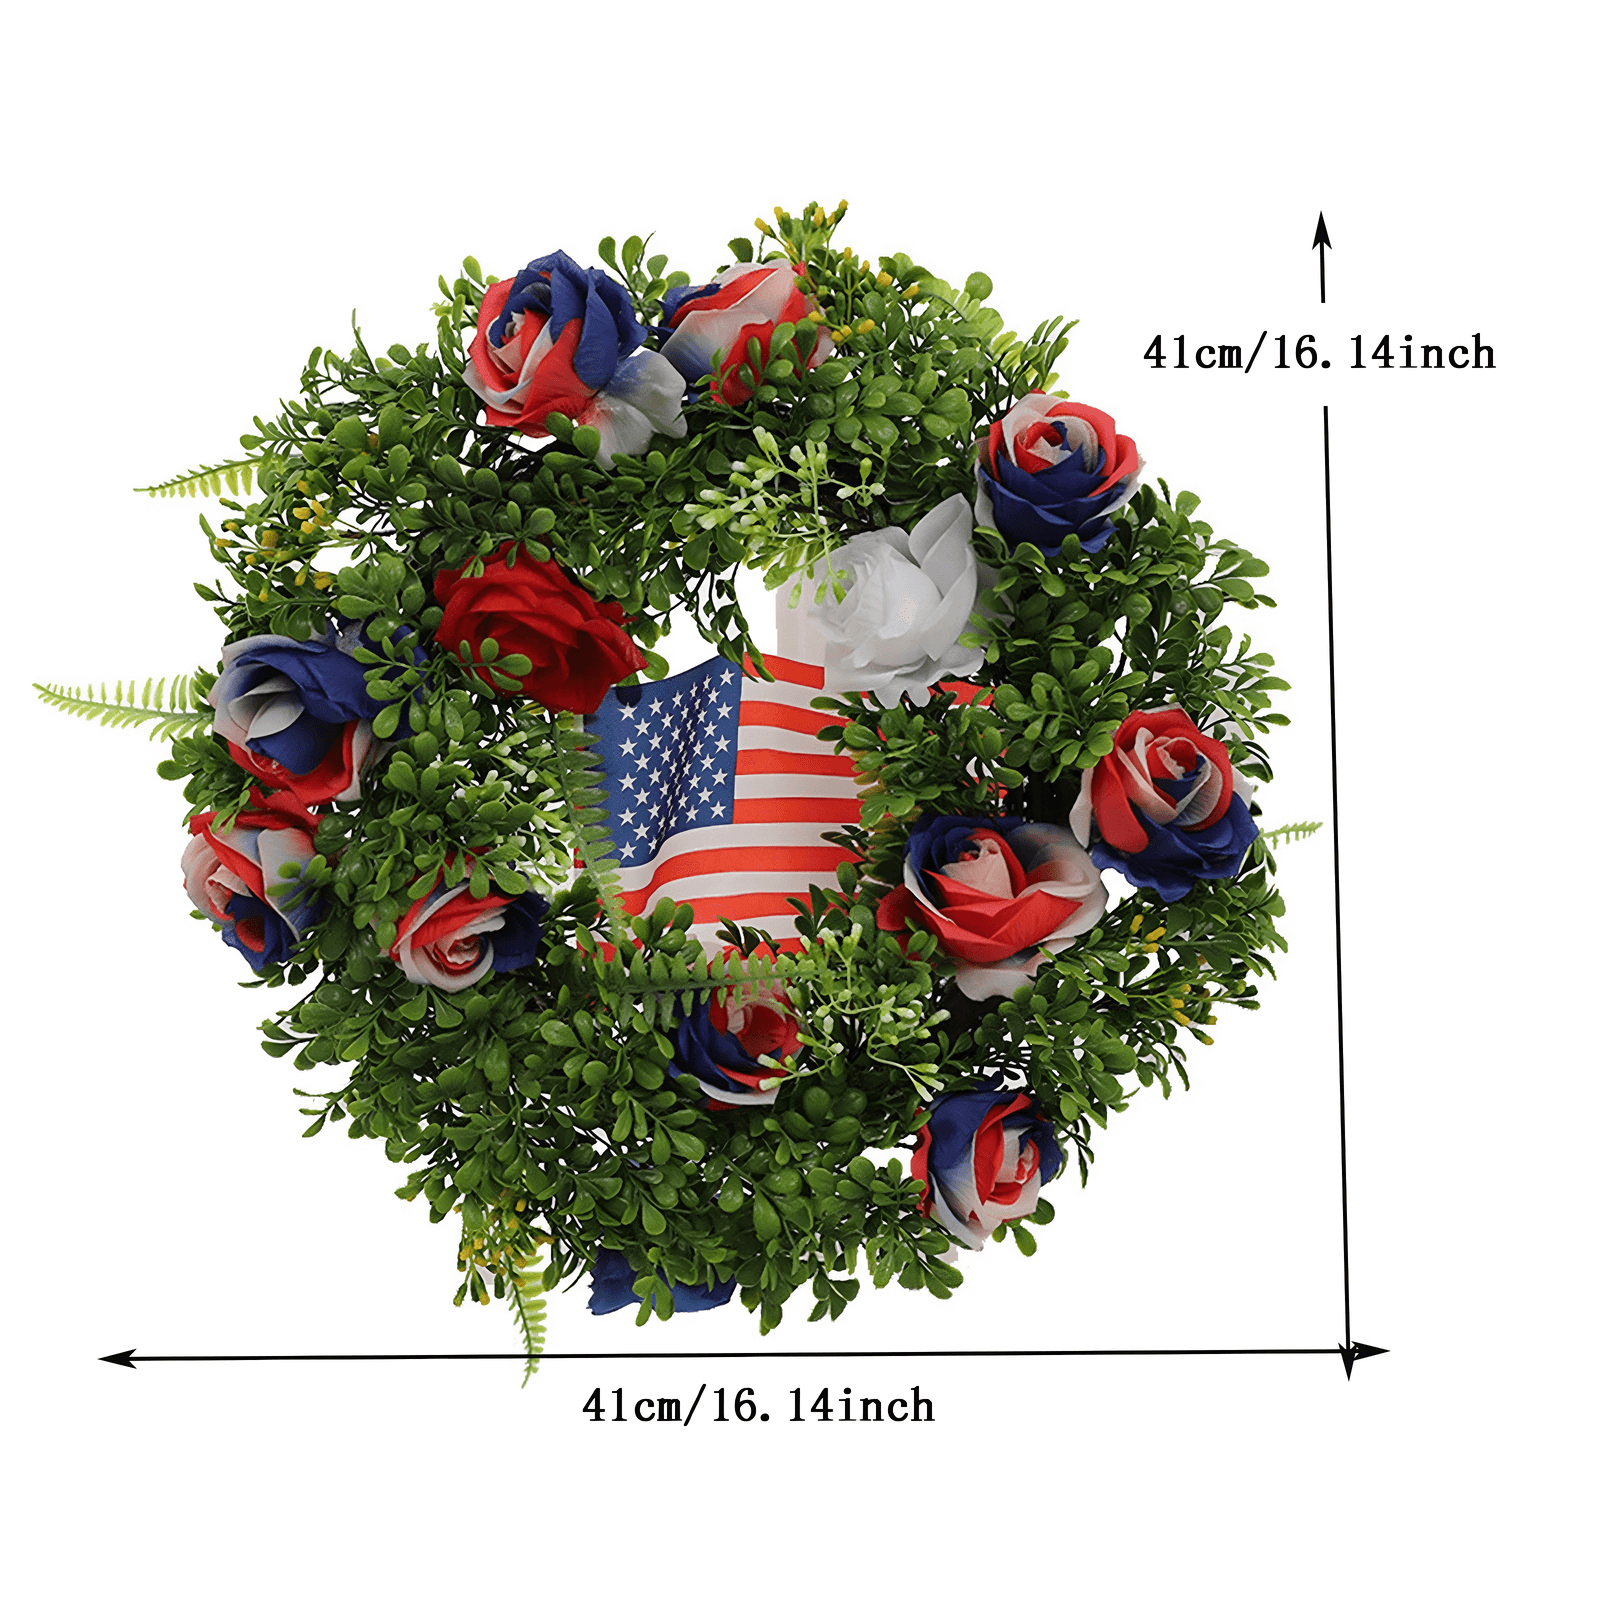 Independence Day Wreath size chart